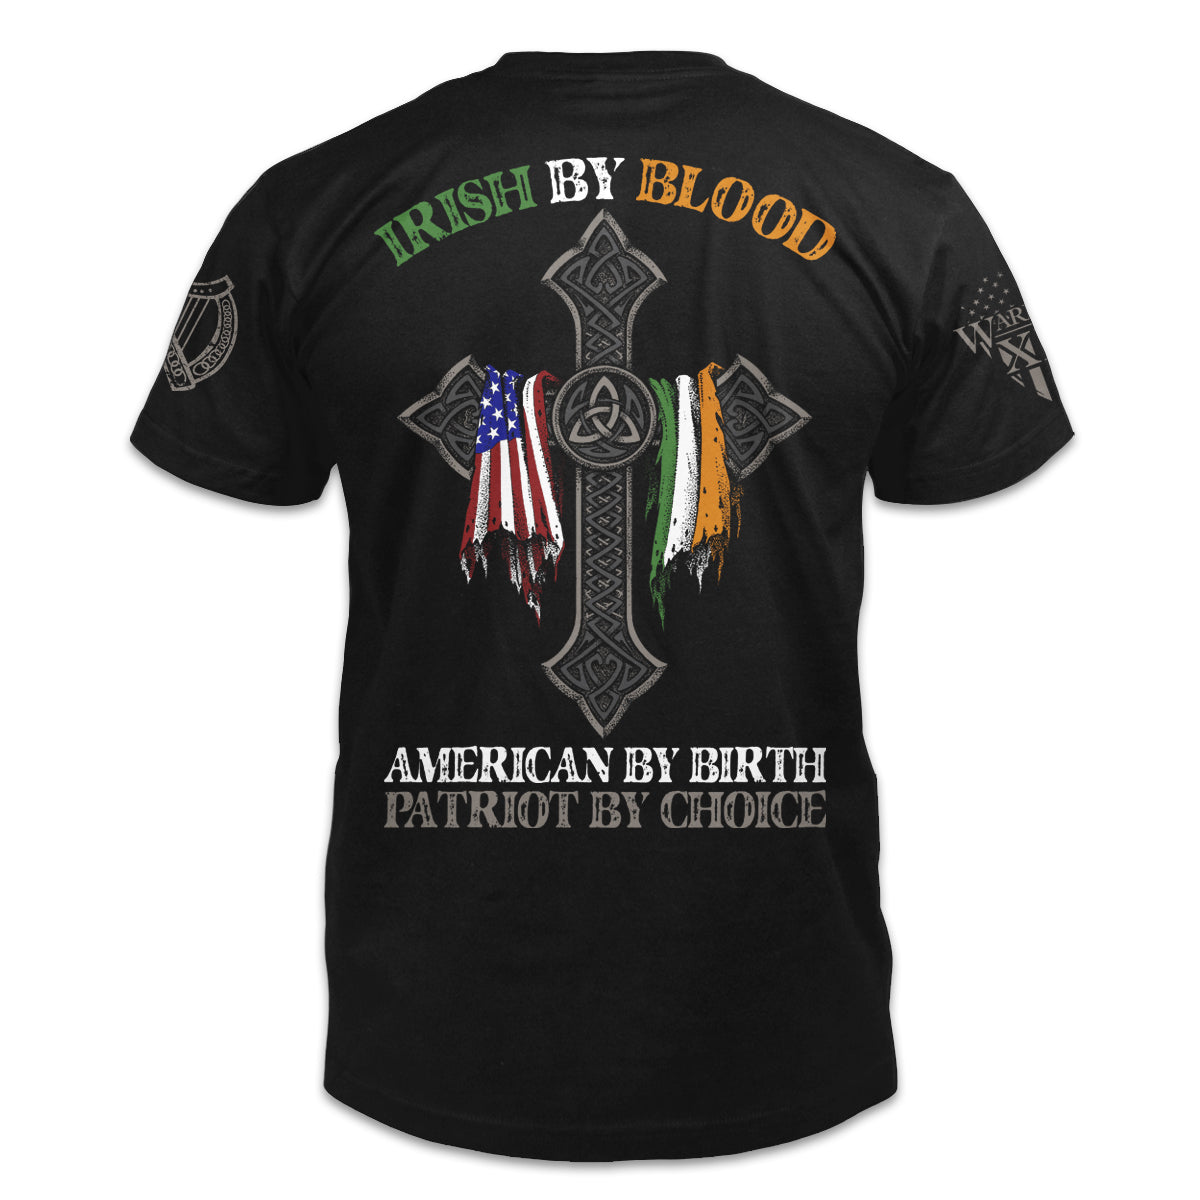 A black t-shirt with the words "Irish by blood, American by birth, patriot by choice" with a cross holding an American and Irish flag printed on the back of the shirt.